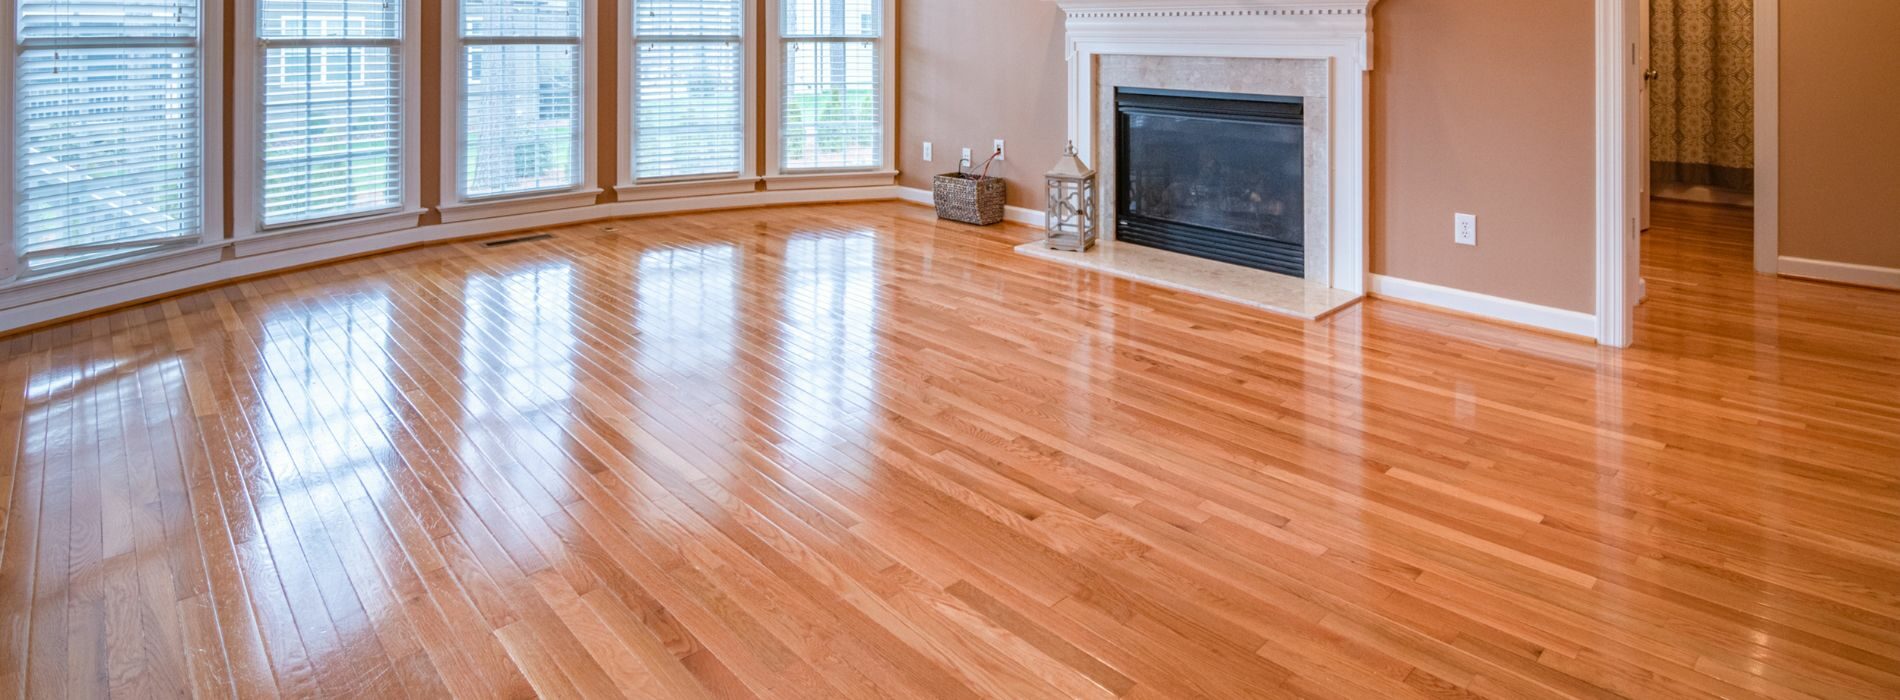 Experience the transformation of an 8-year-old hardwood floor in Barkingside, IG6 by Mr Sander®. Bona 2.2K Frost whitewashing and 15% Traffic HD matte lacquer create a durable, low sheen finish. Embrace timeless elegance with our exceptional floor restoration services.